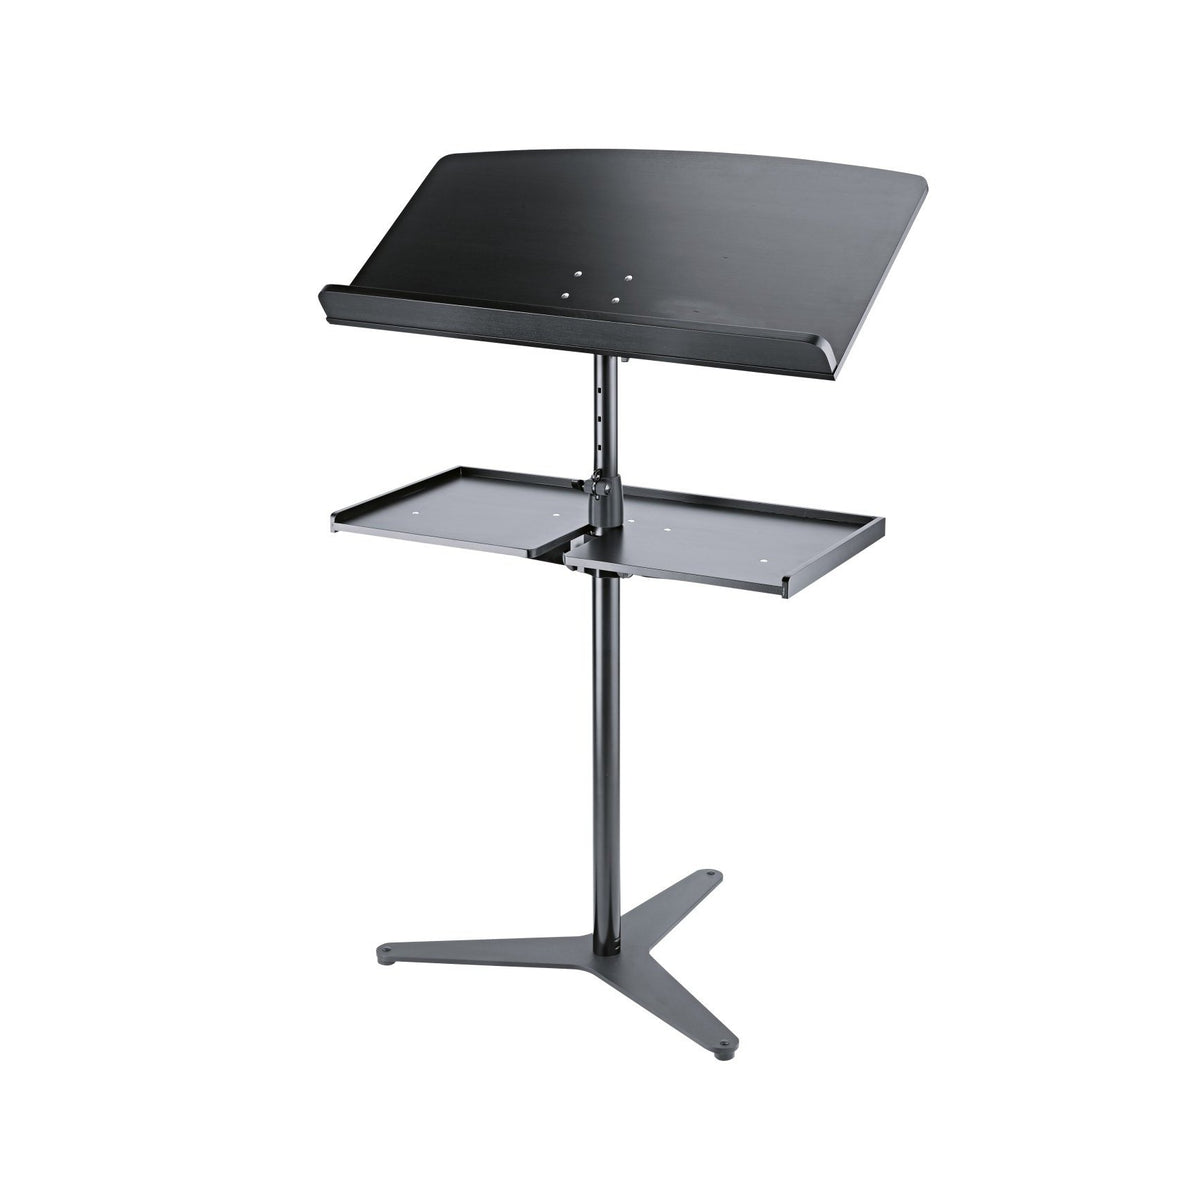 KÃ¶nig &amp; Meyer - 12330 Orchestra Conductor Stand Base-Music Stand-KÃ¶nig &amp; Meyer-Music Elements